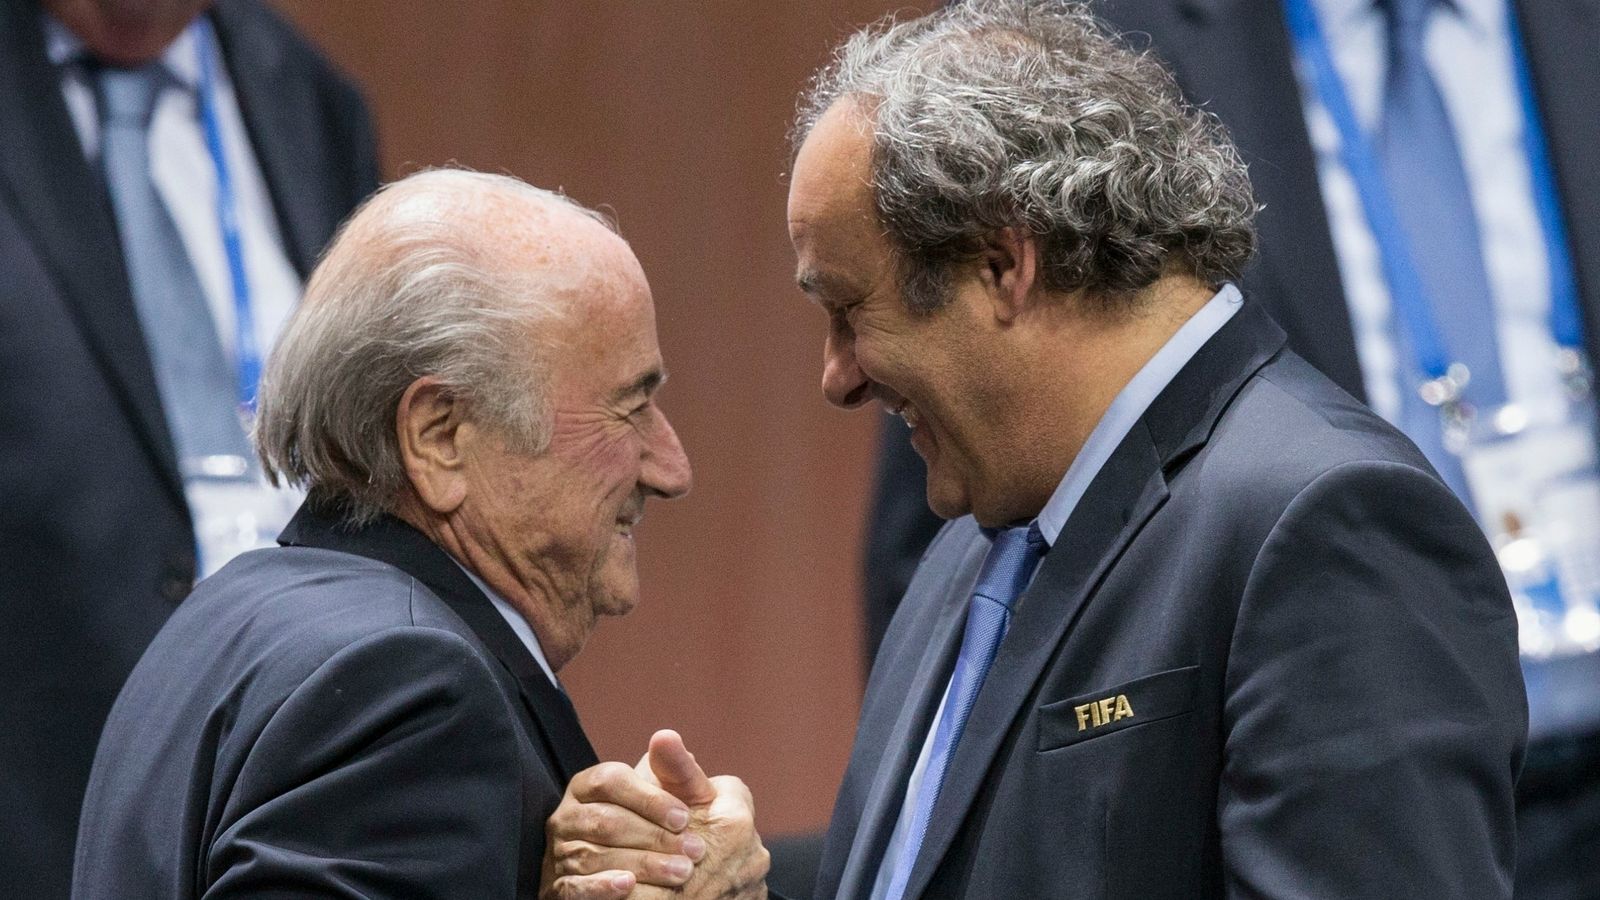 Blatter, Platini Cleared Of Corruption Charges